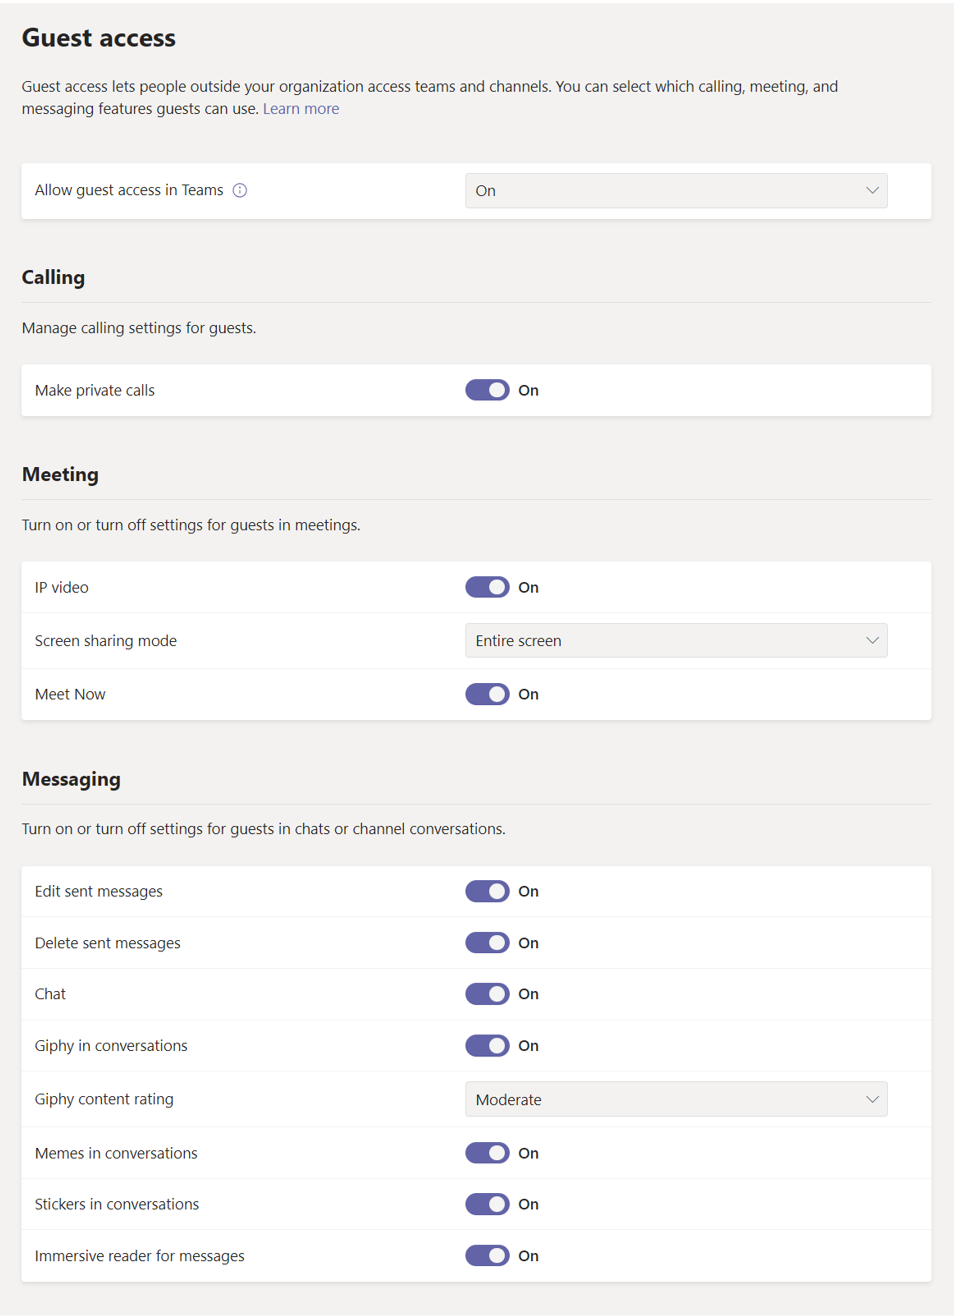 Screenshot of Guest permissions settings in Teams.